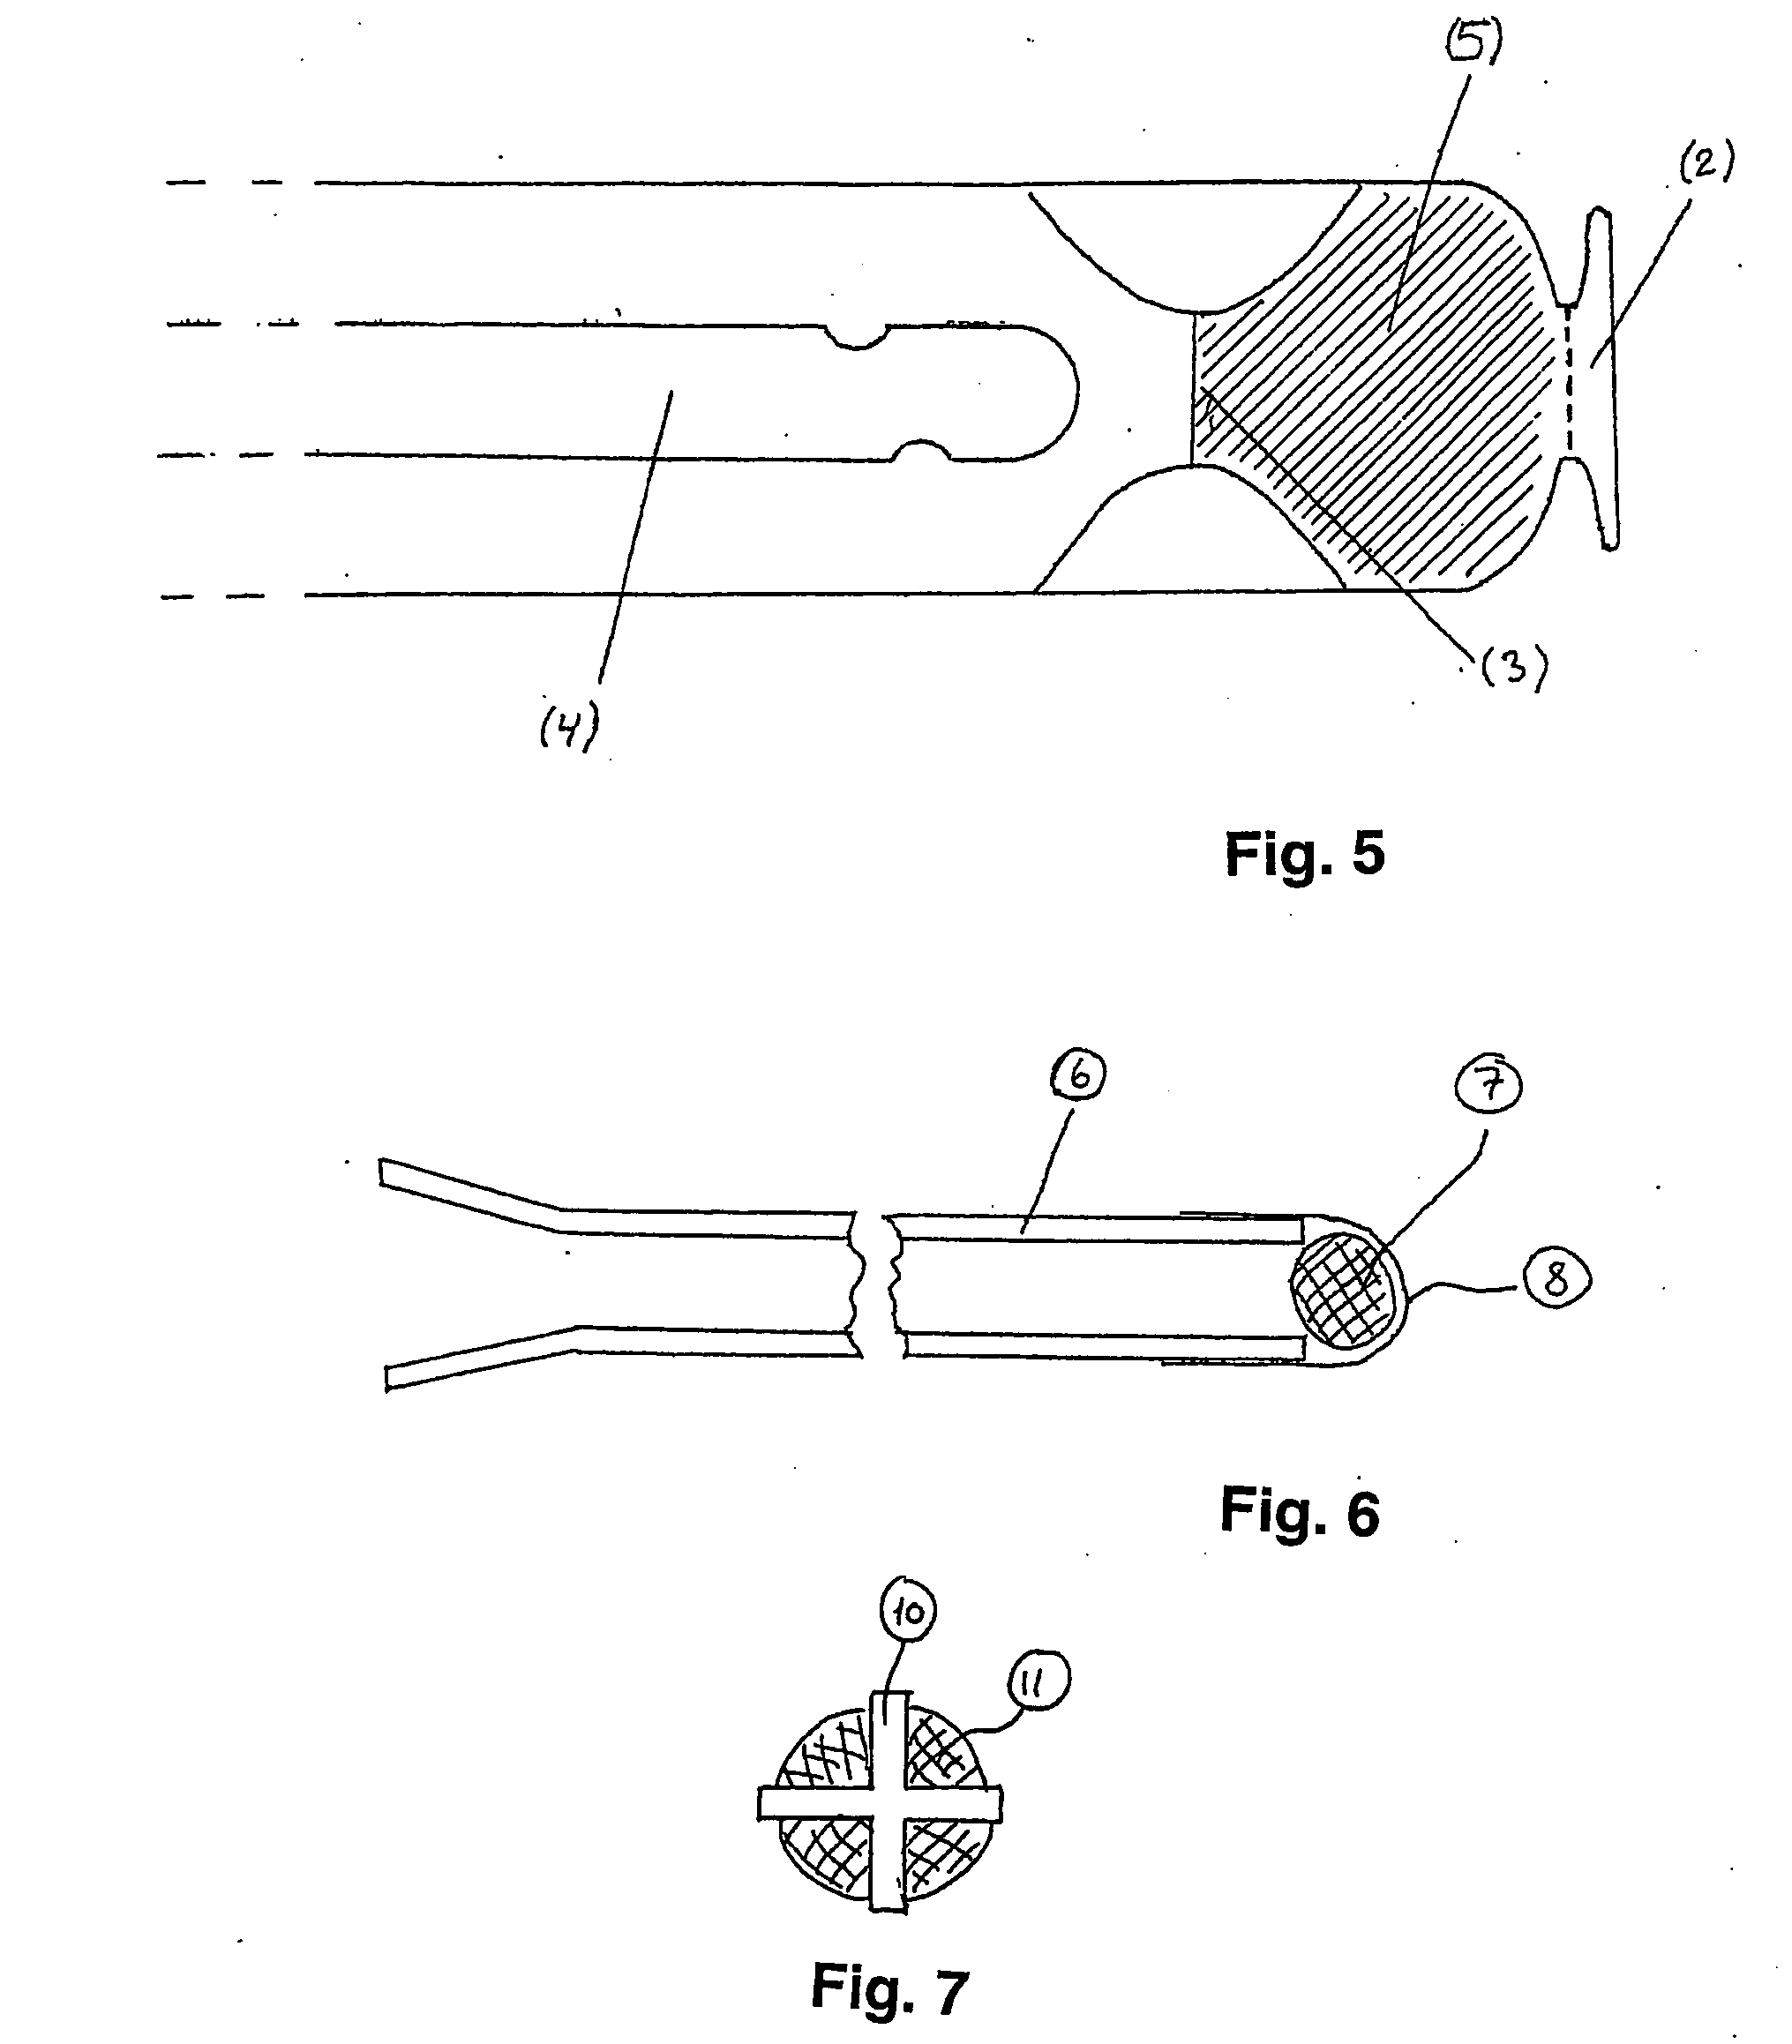 Urinary catheter device with a pharmaceutically active composition